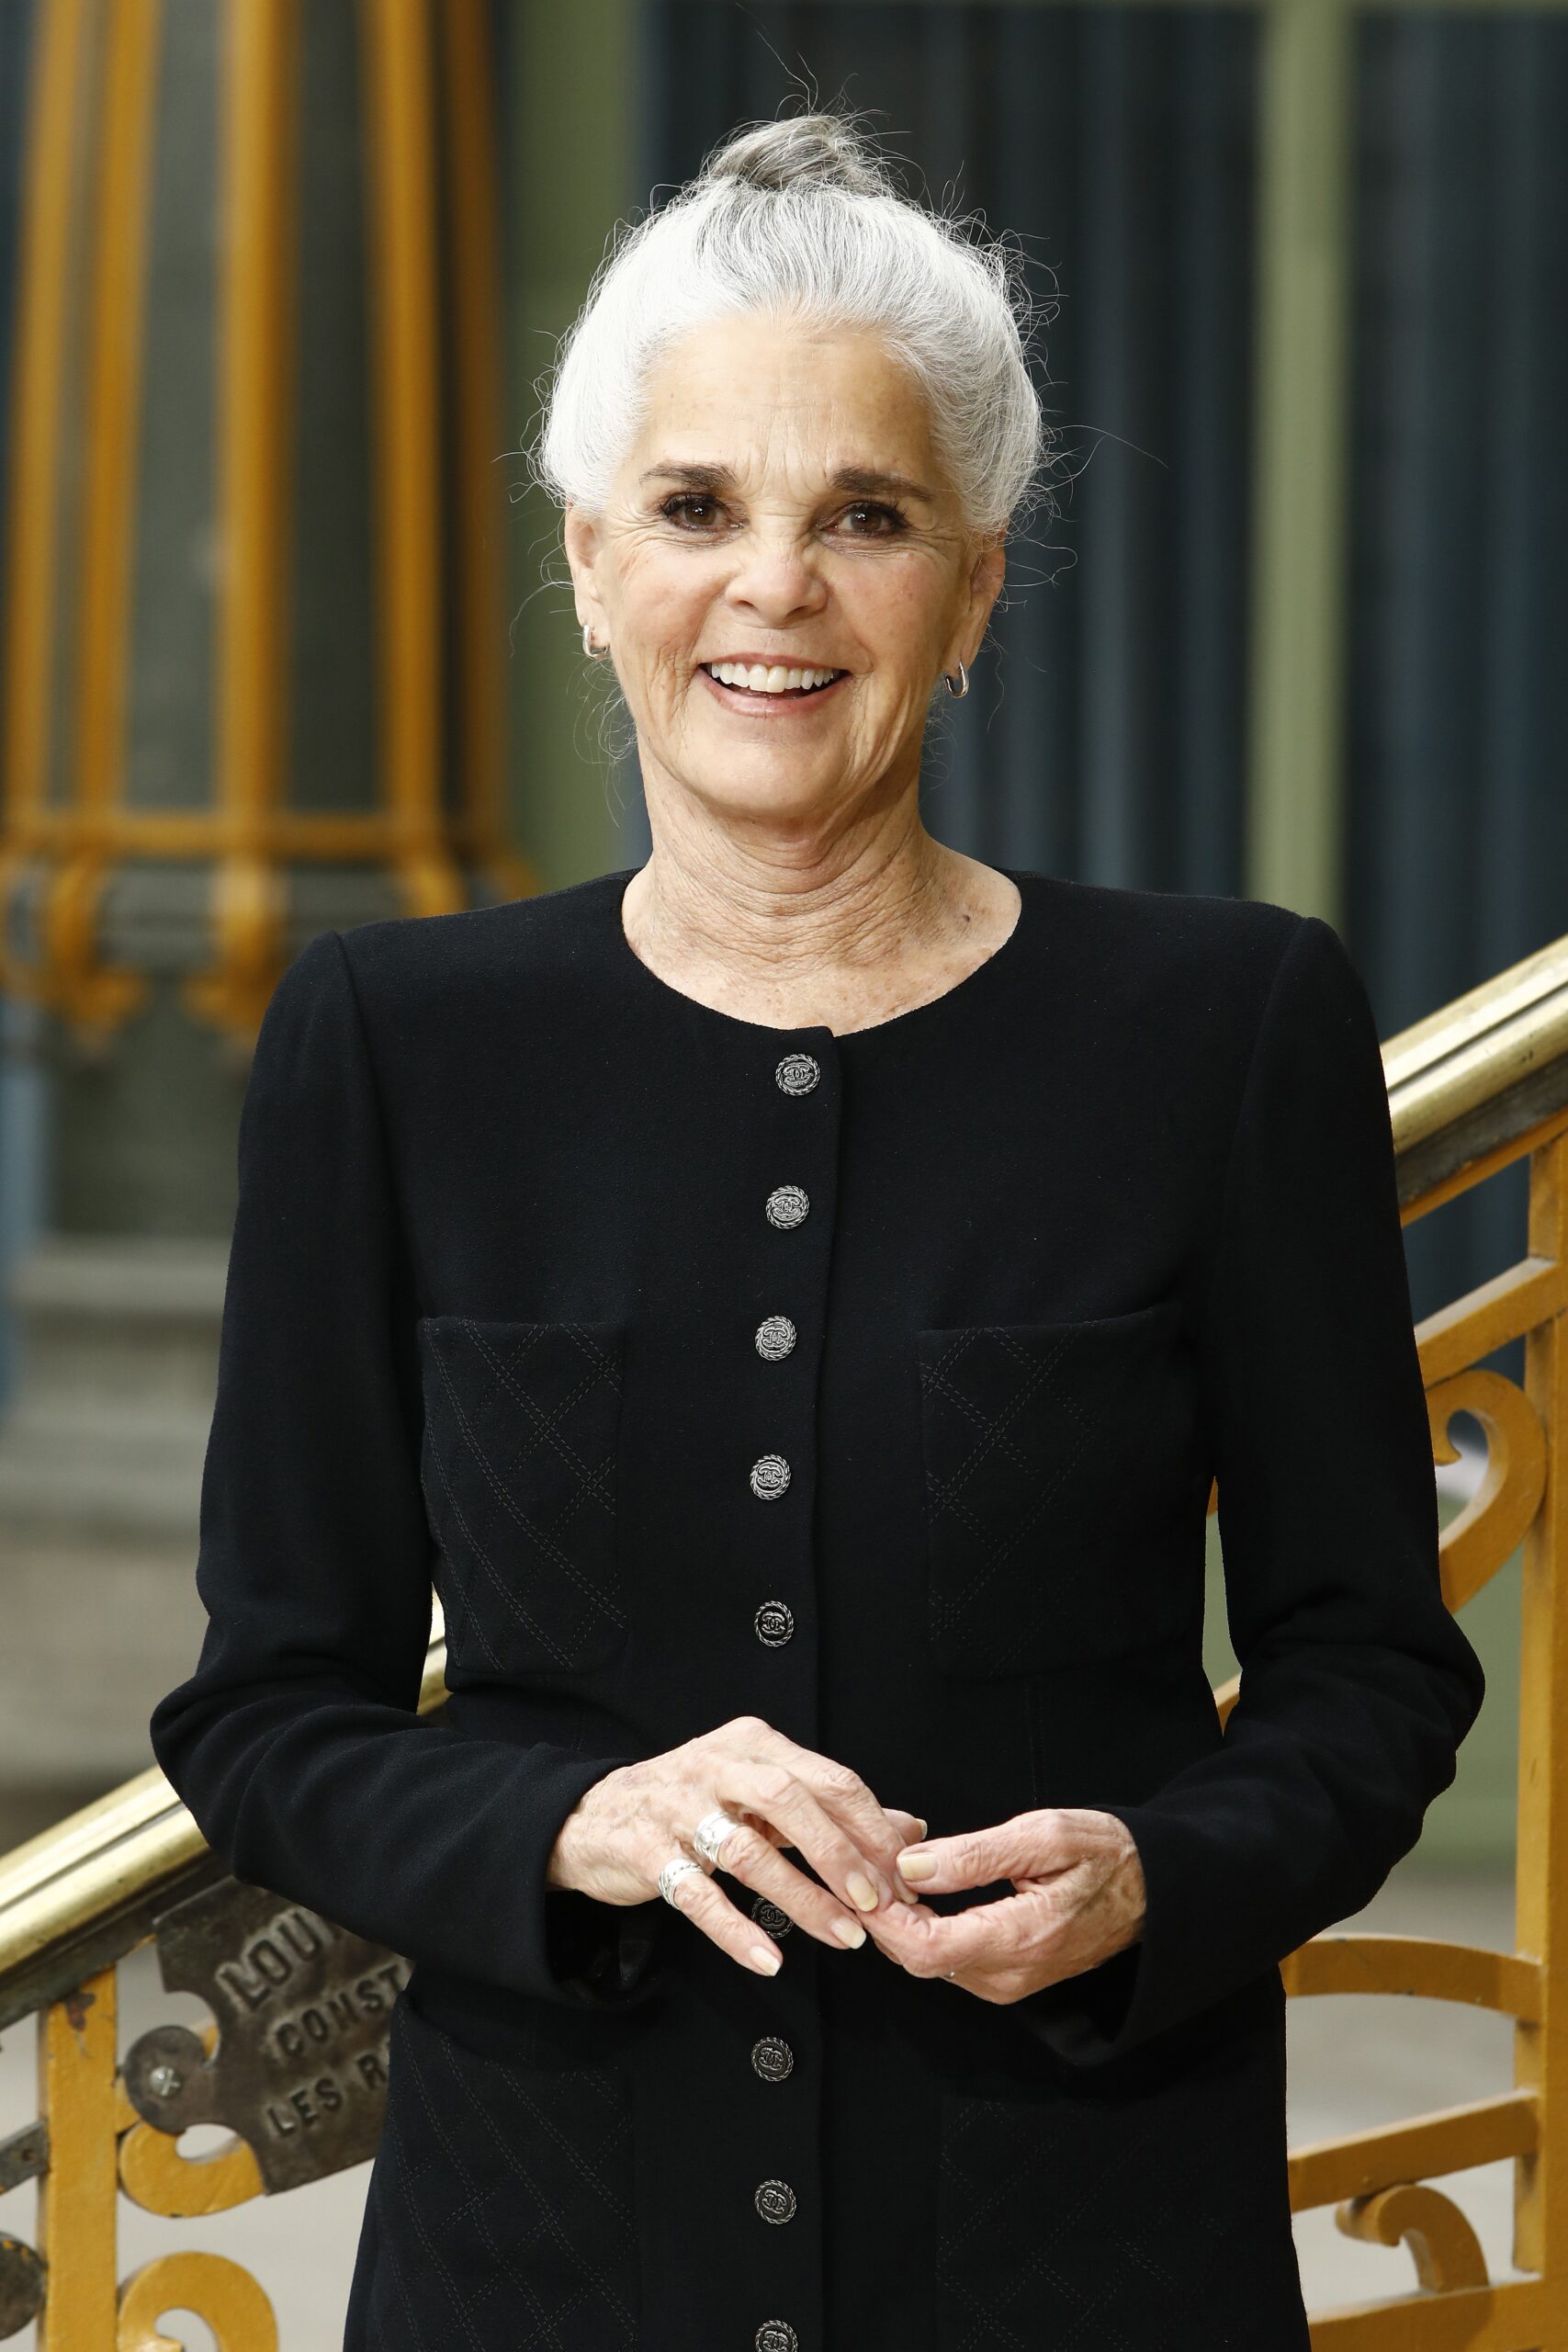 Ali MacGraw attending the Chanel Cruise 2020 Collection Photocall In Le Grand Palais on May 3, 2019 in Paris, France. | Source: Getty Images